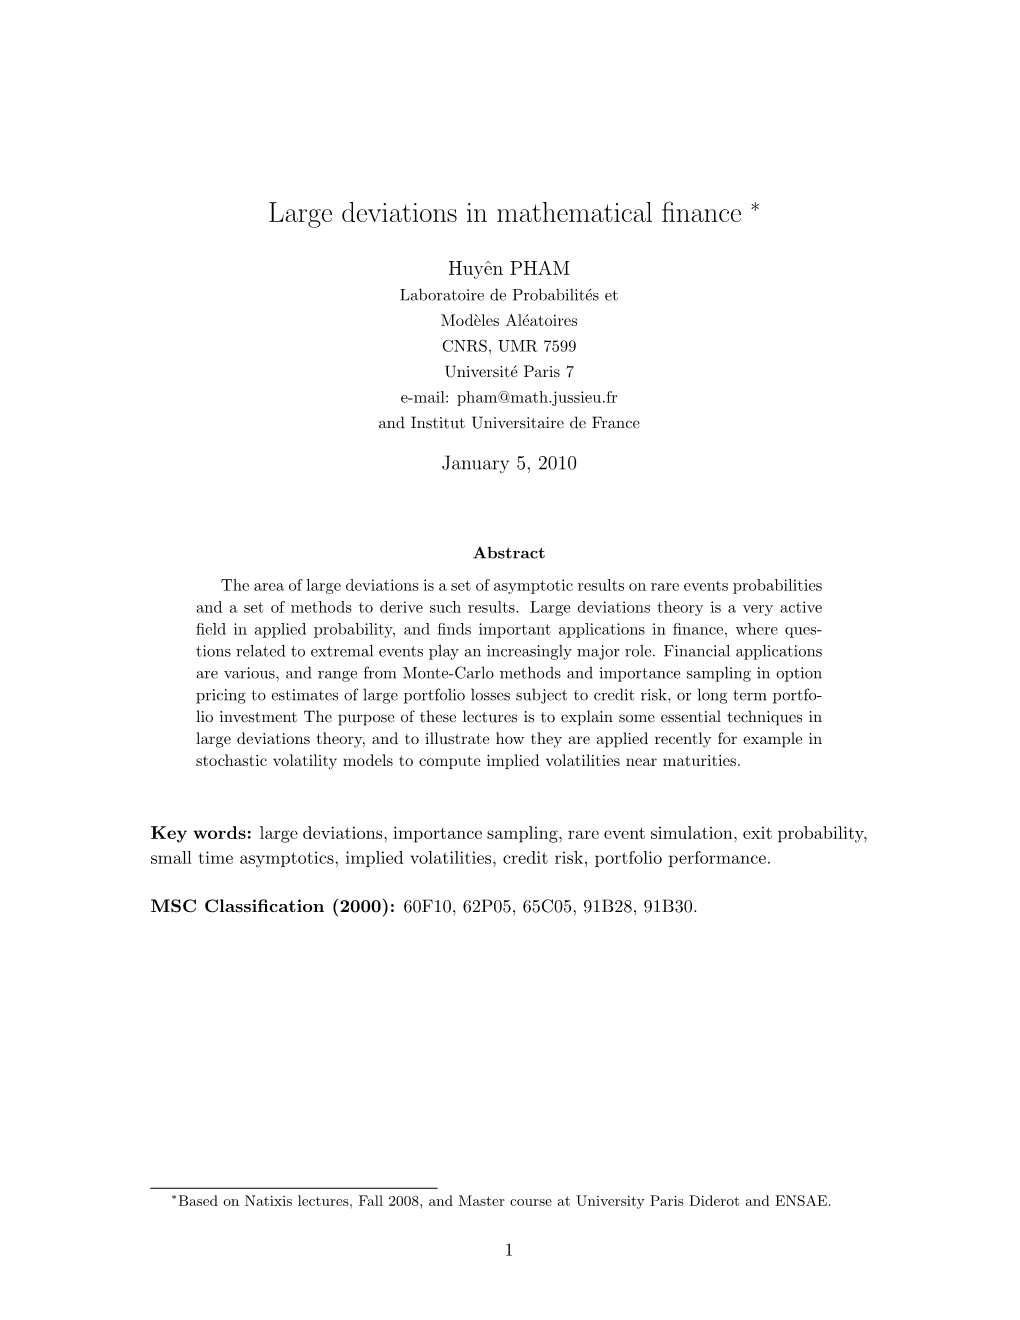 Large Deviations in Mathematical Finance